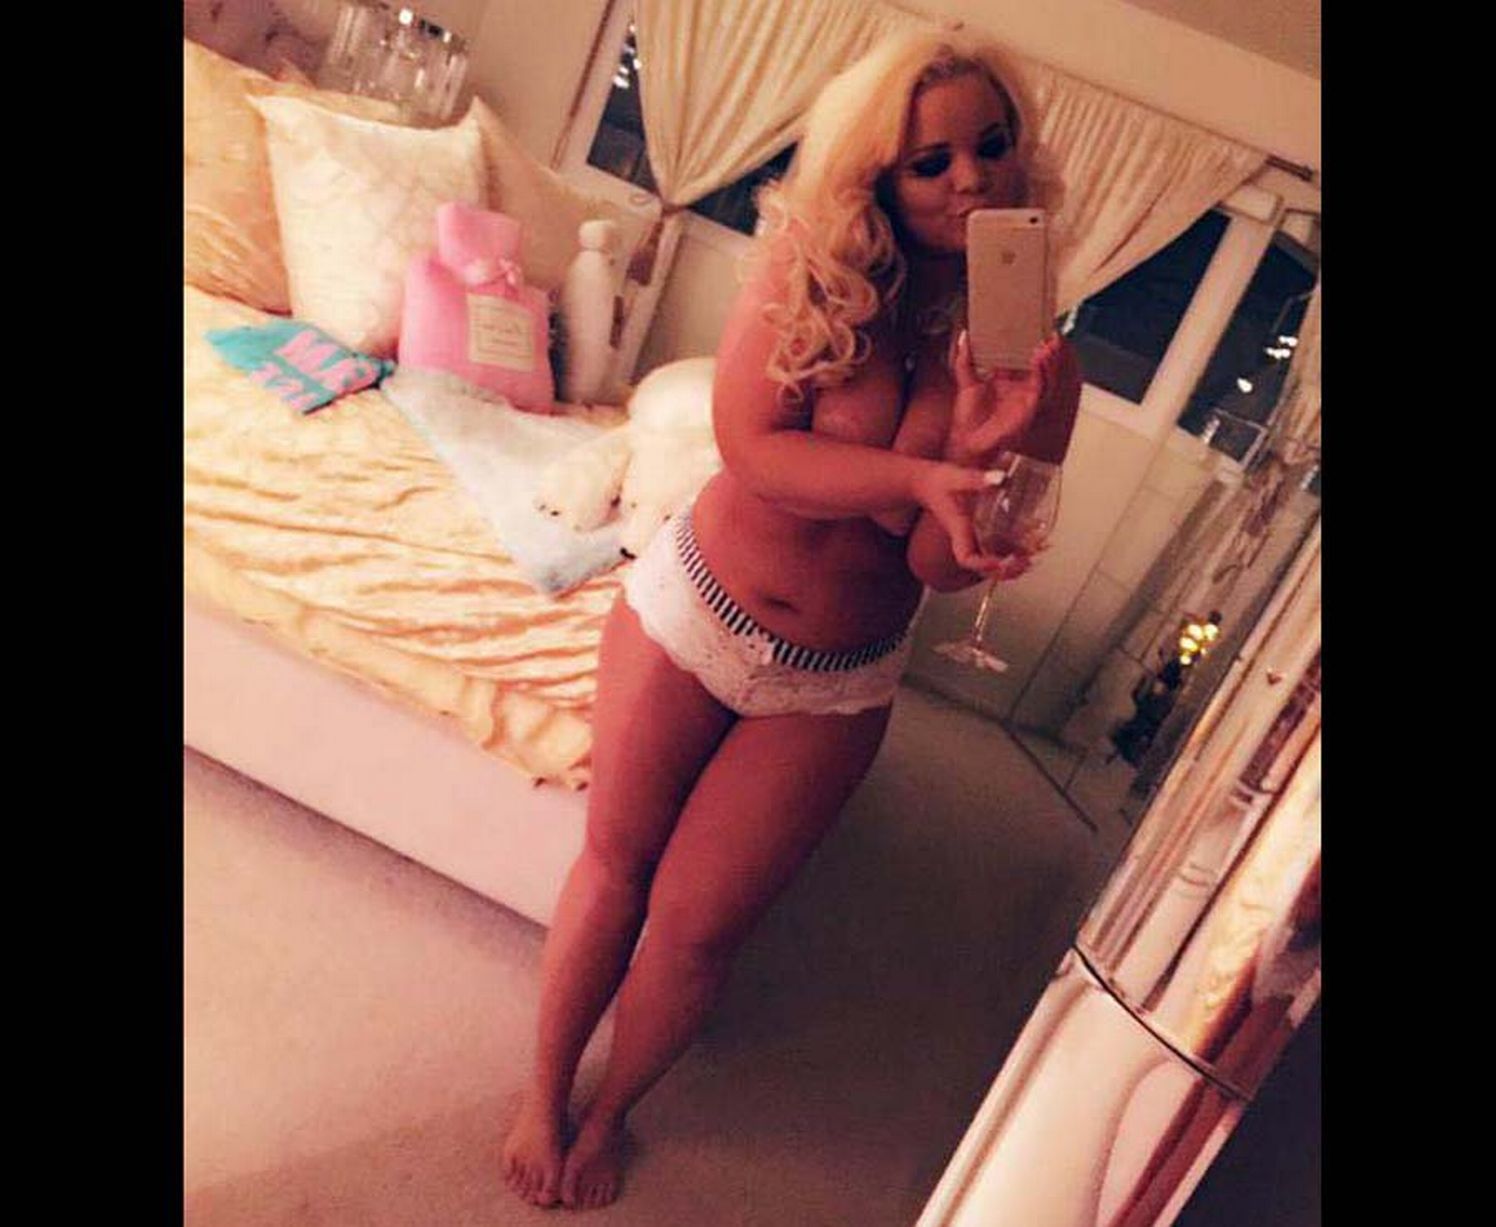 alina mihalcea recommends trisha paytas nude snapchat pic